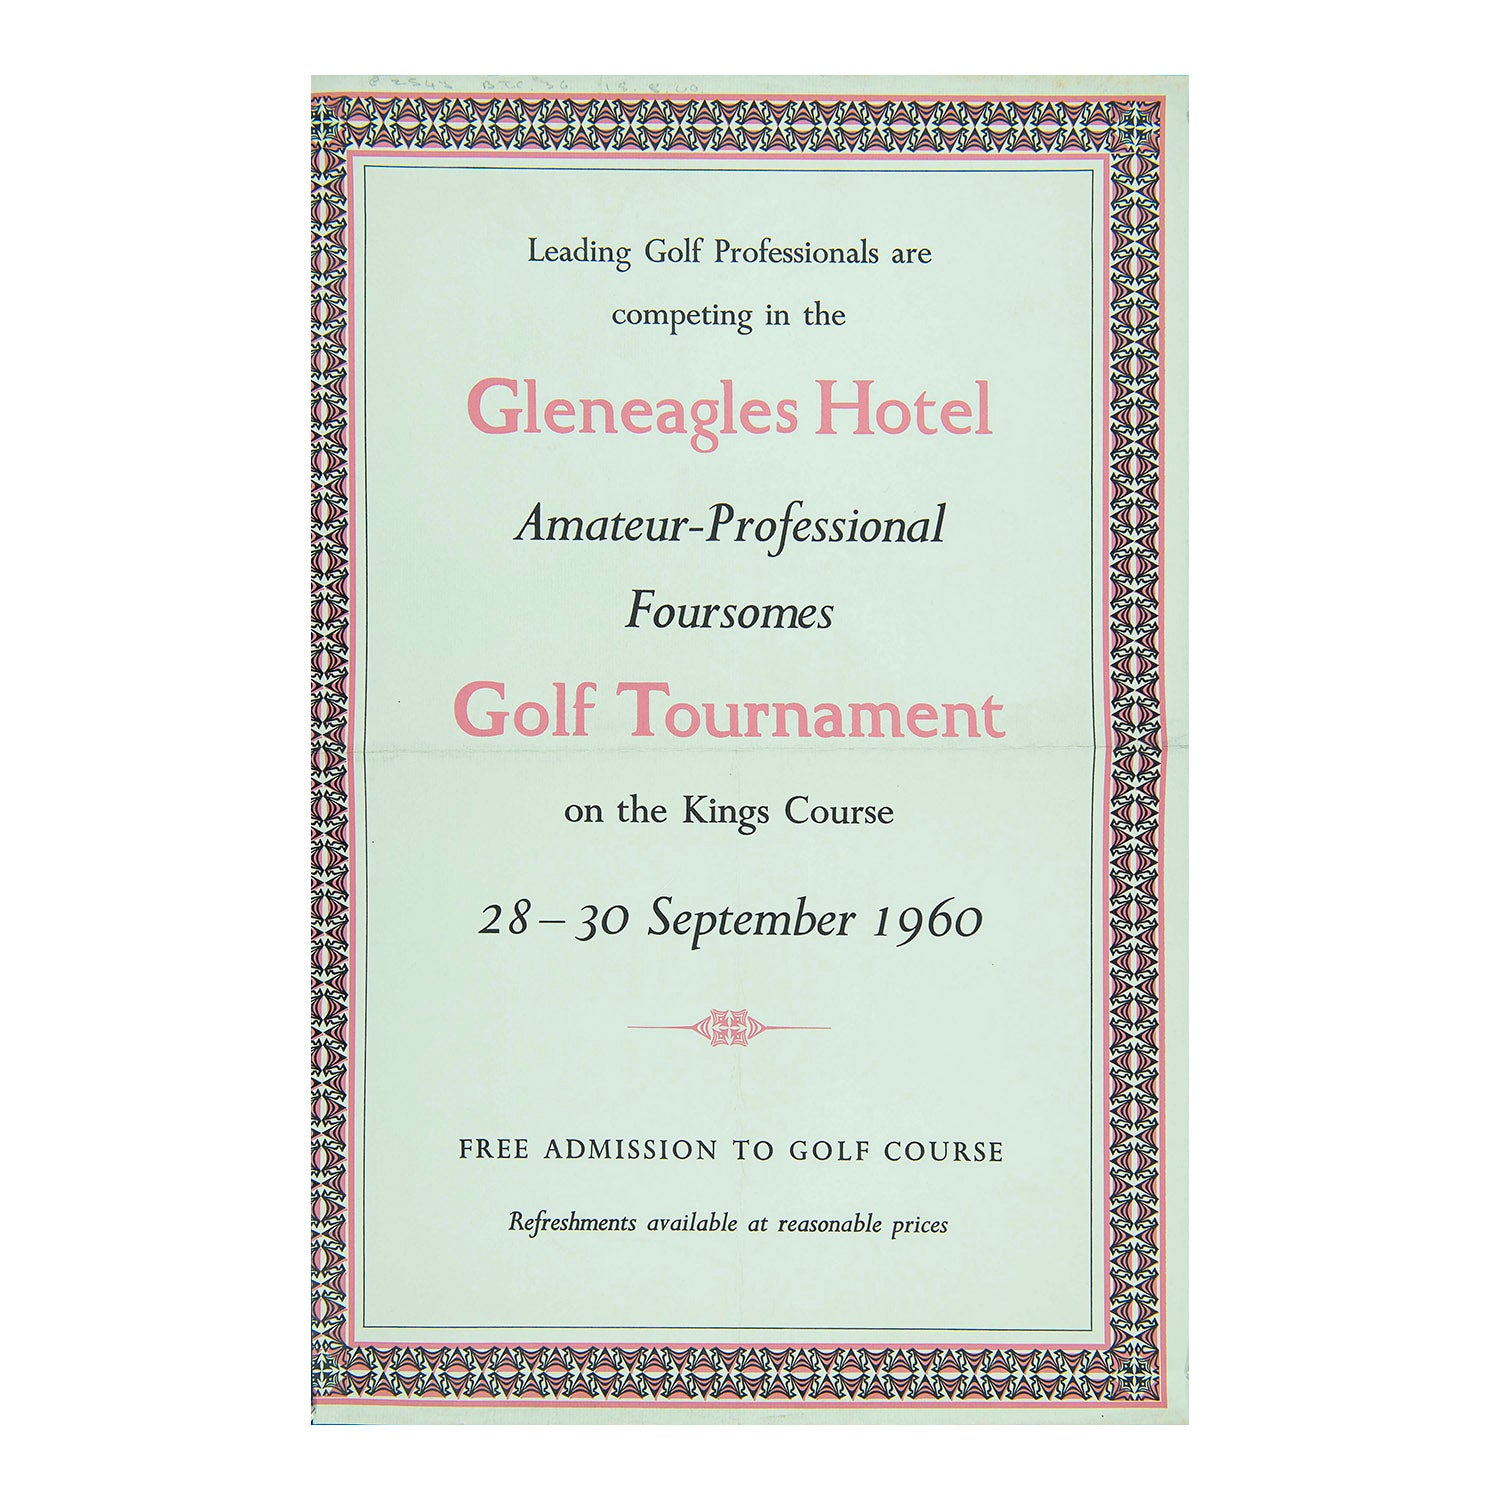 Gleneagles Hotel and golf resort, near Auchterarder, Scotland, 1960. The poster, with decorative border designed in-house at the Curwen Press, promotes “Golf Tournaments on the Kings Course”.